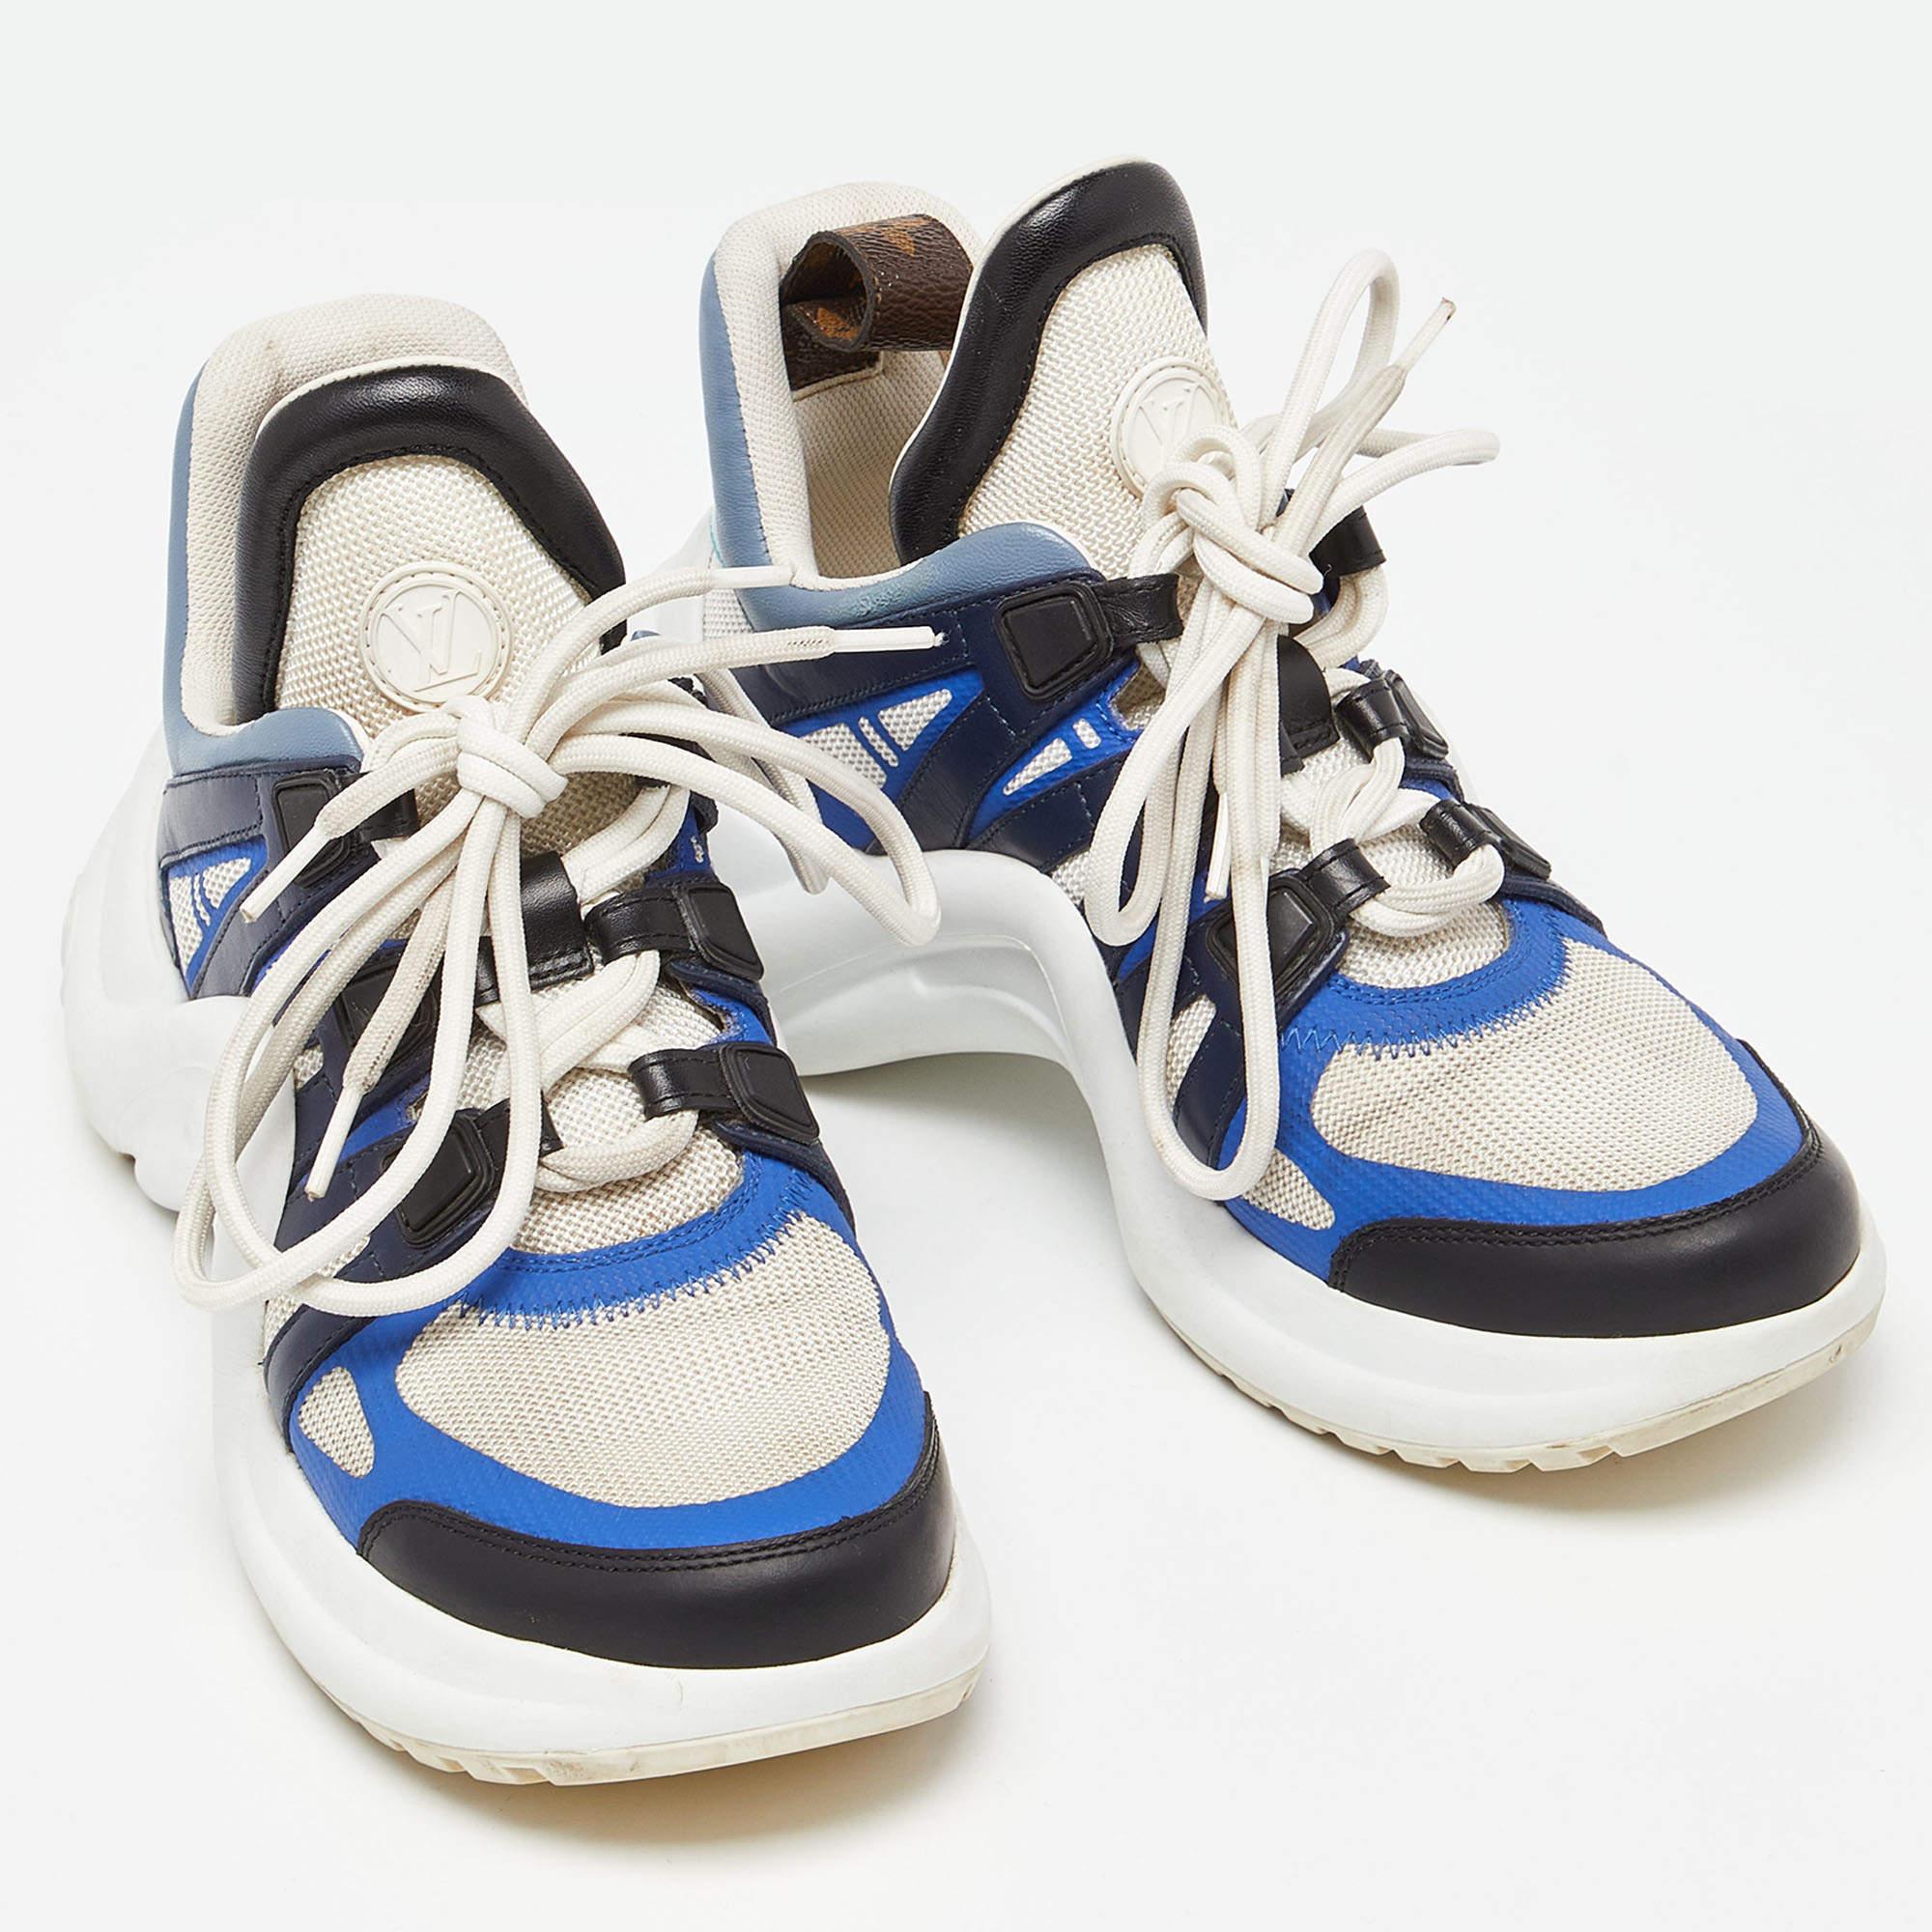 Women's Louis Vuitton Tricolor Mesh and Leather Archlight Sneakers Size 36